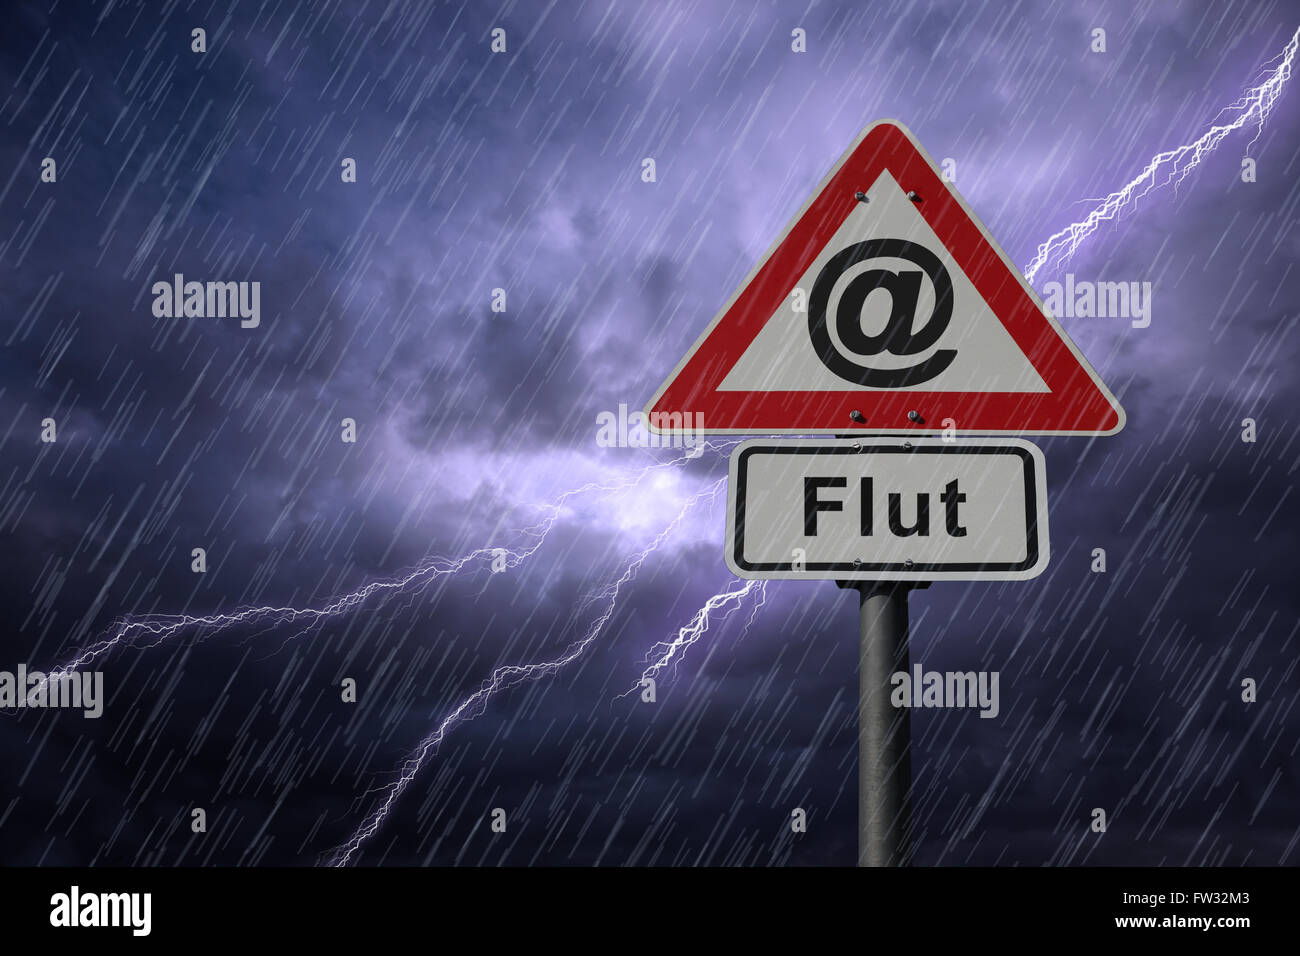 @ symbol and Flut road signs againt a rainy sky with lightning Stock Photo